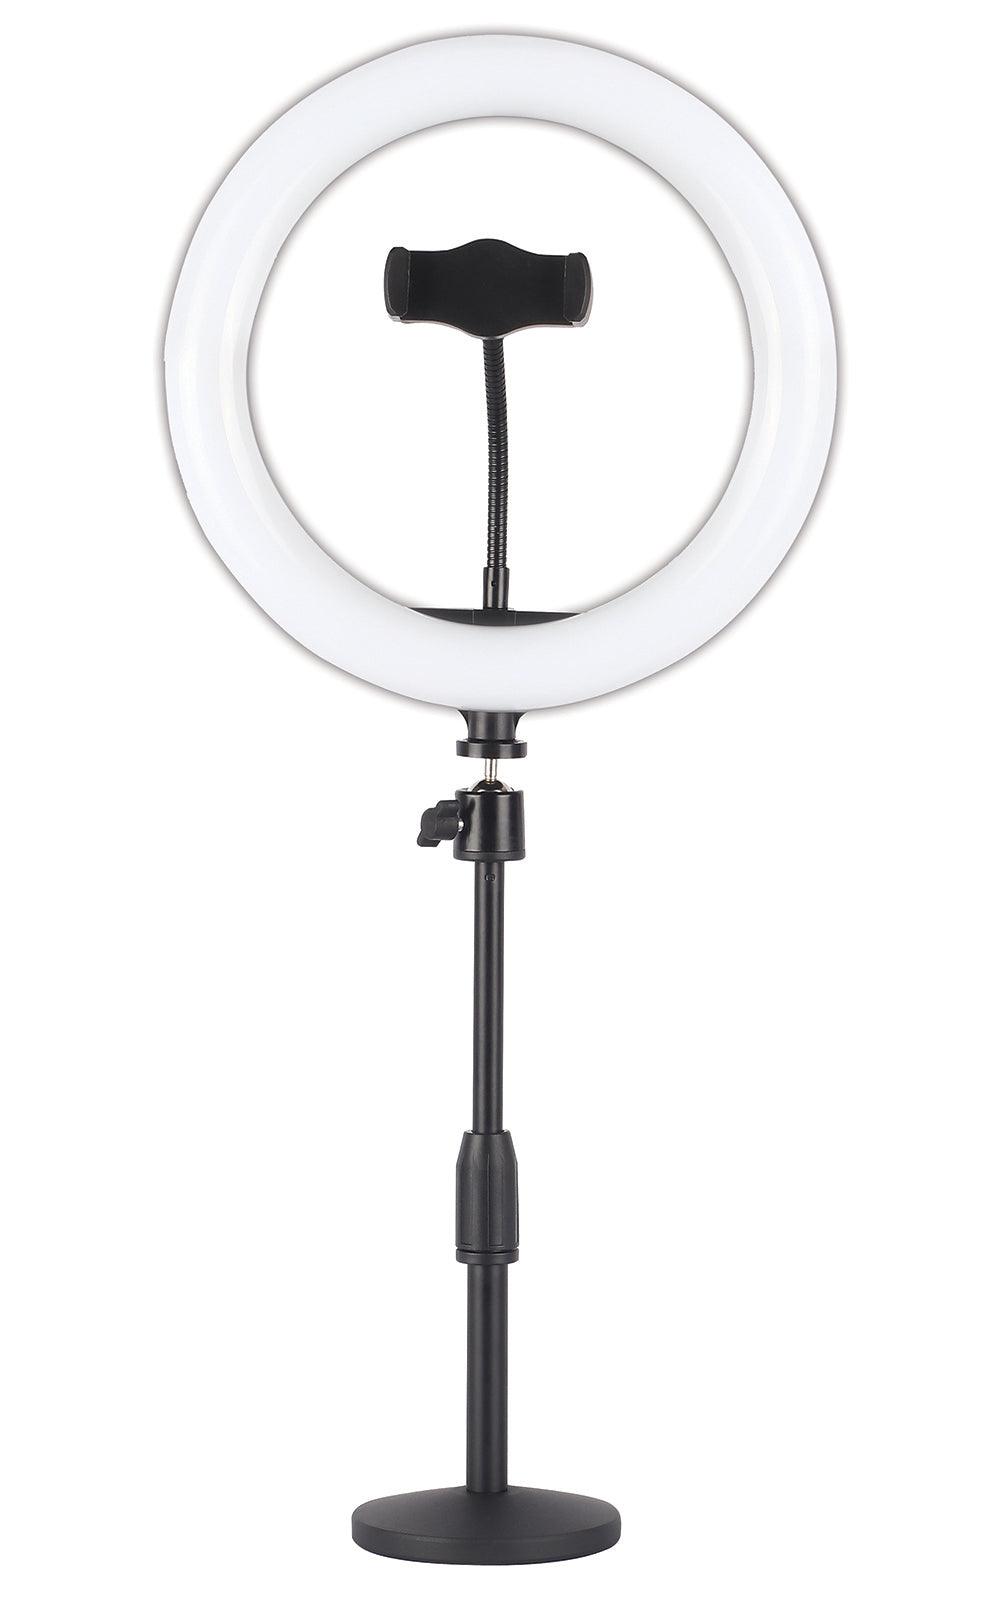 CAD Desktop Ring Light with Phone Holder - DY Pro Audio